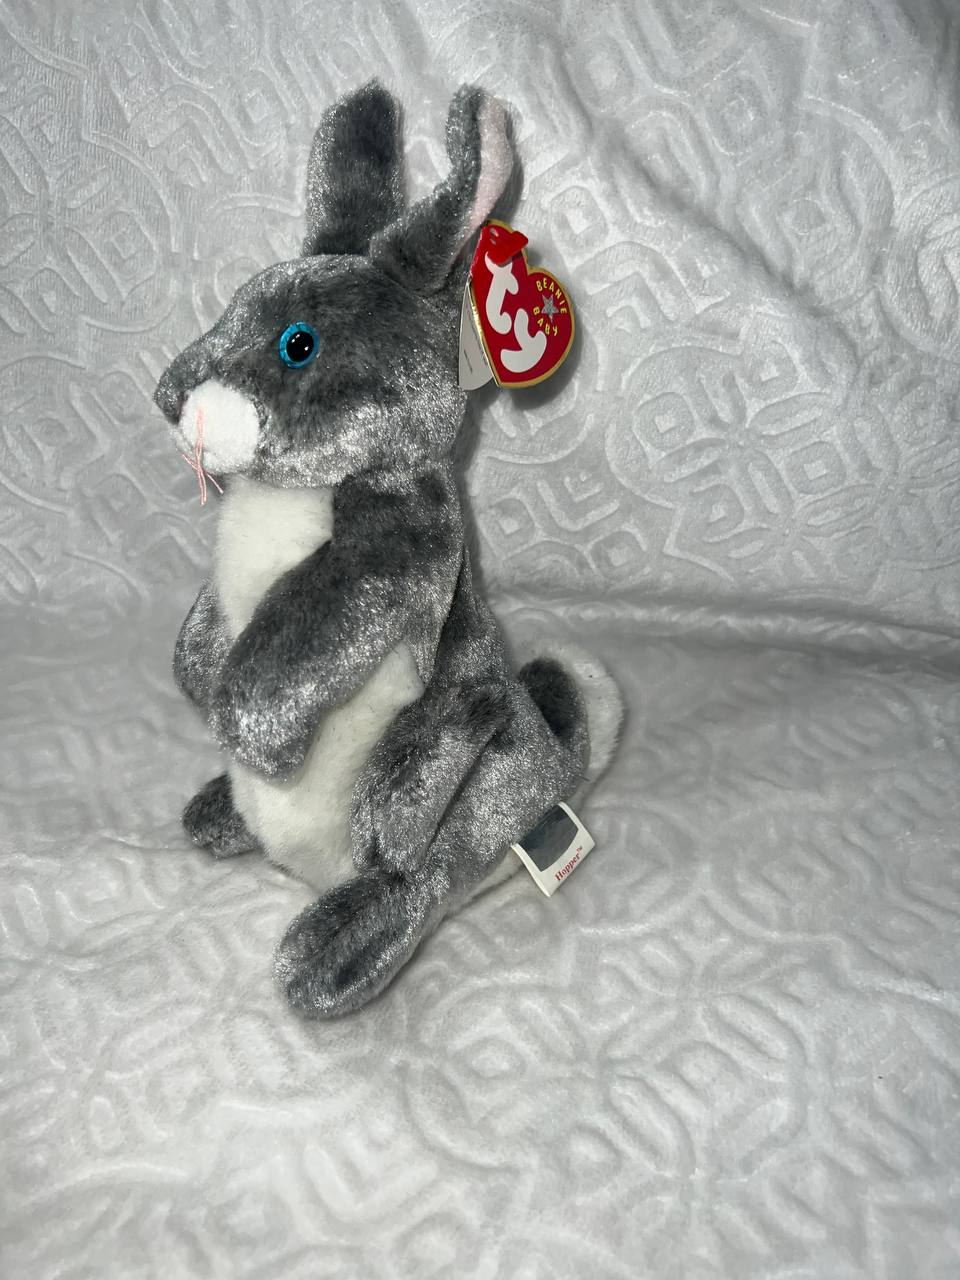 *RARE* MINT Hopper Beanie Baby 2000 With Tag